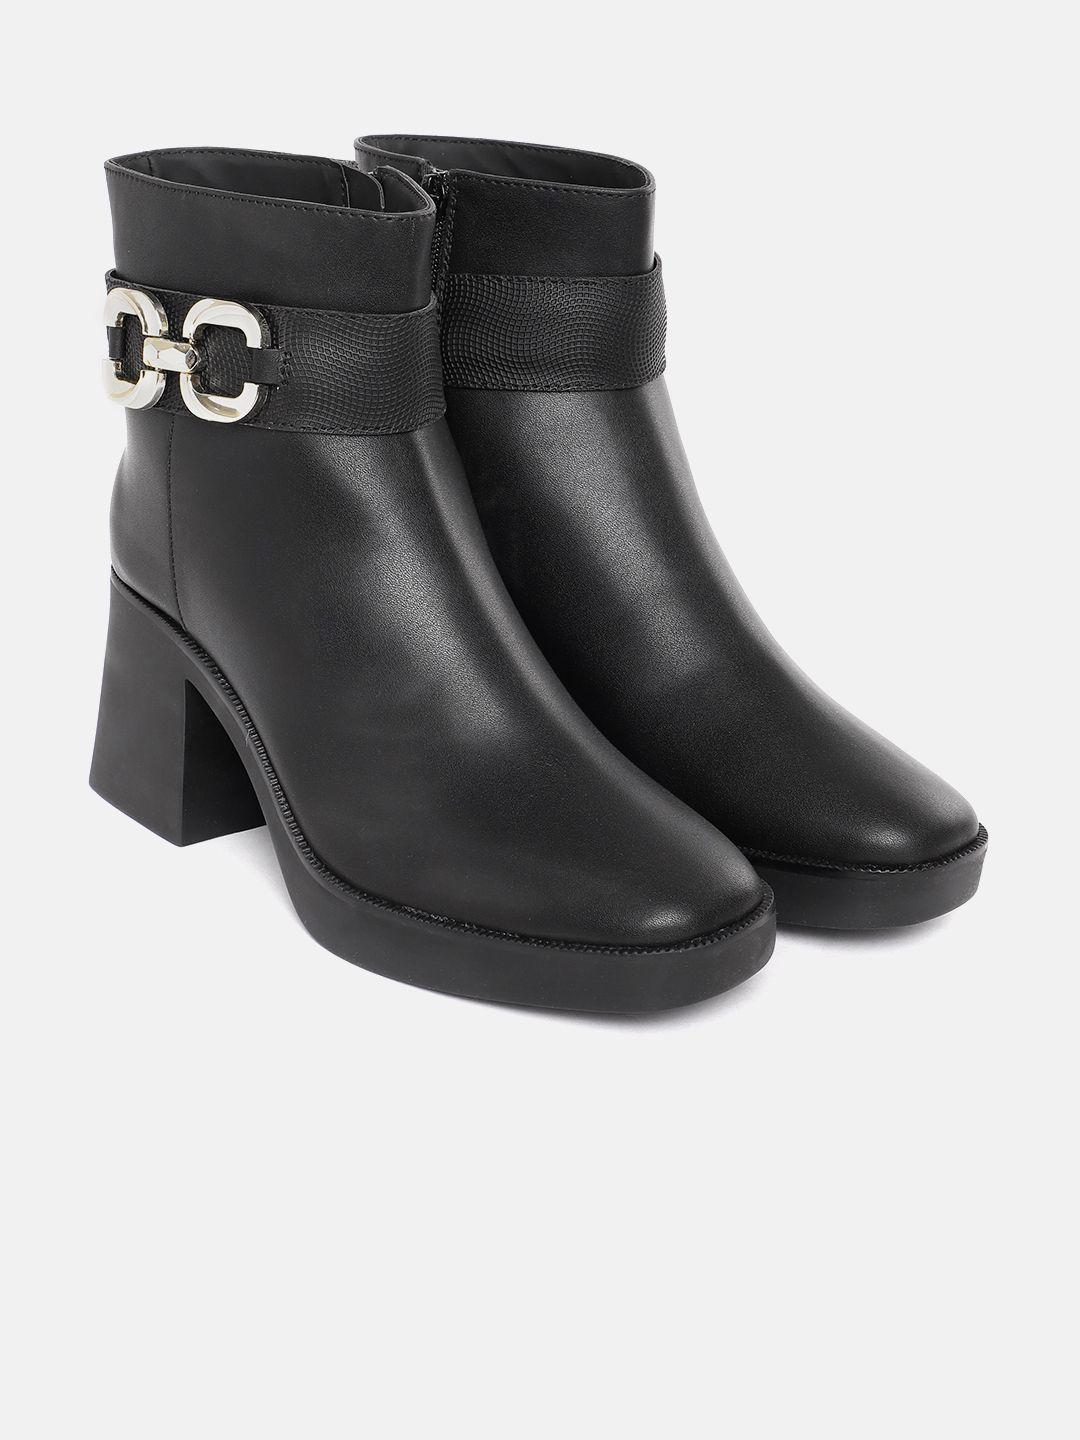 lavie-women-square-toe-mid-top-block-heel-boots-with-chain-detail